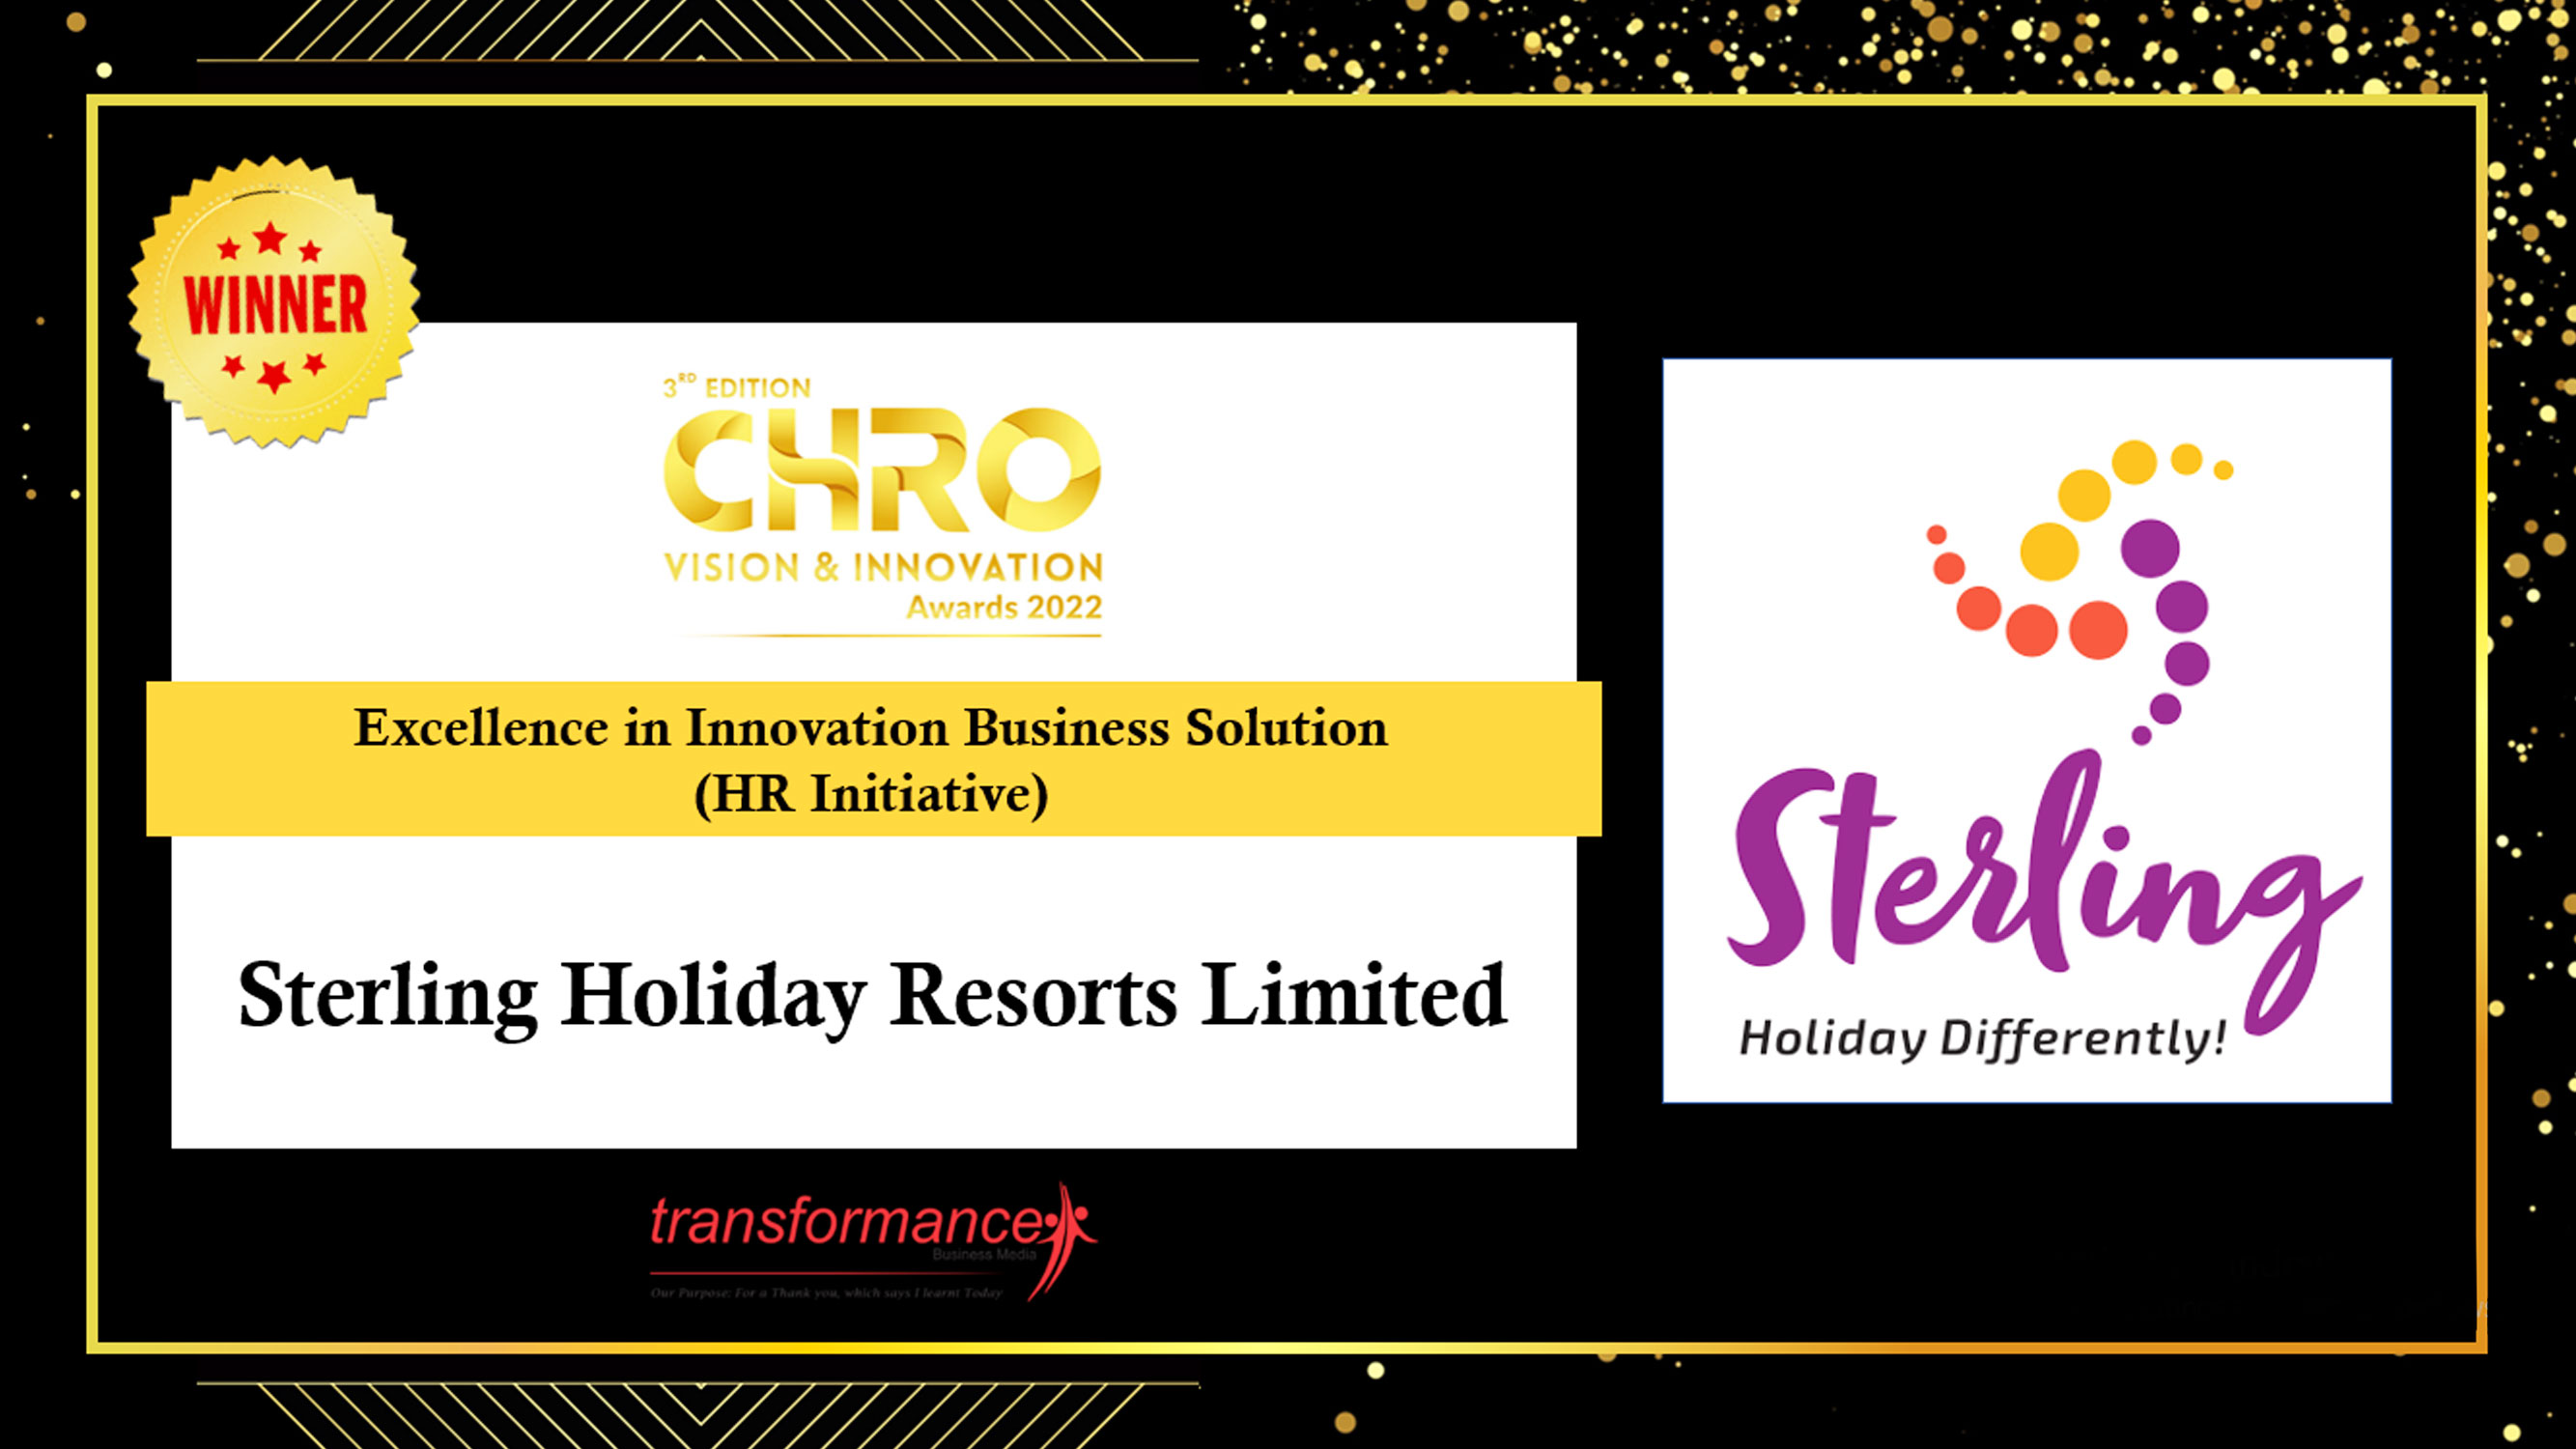 Sterling Holiday Resorts Limited